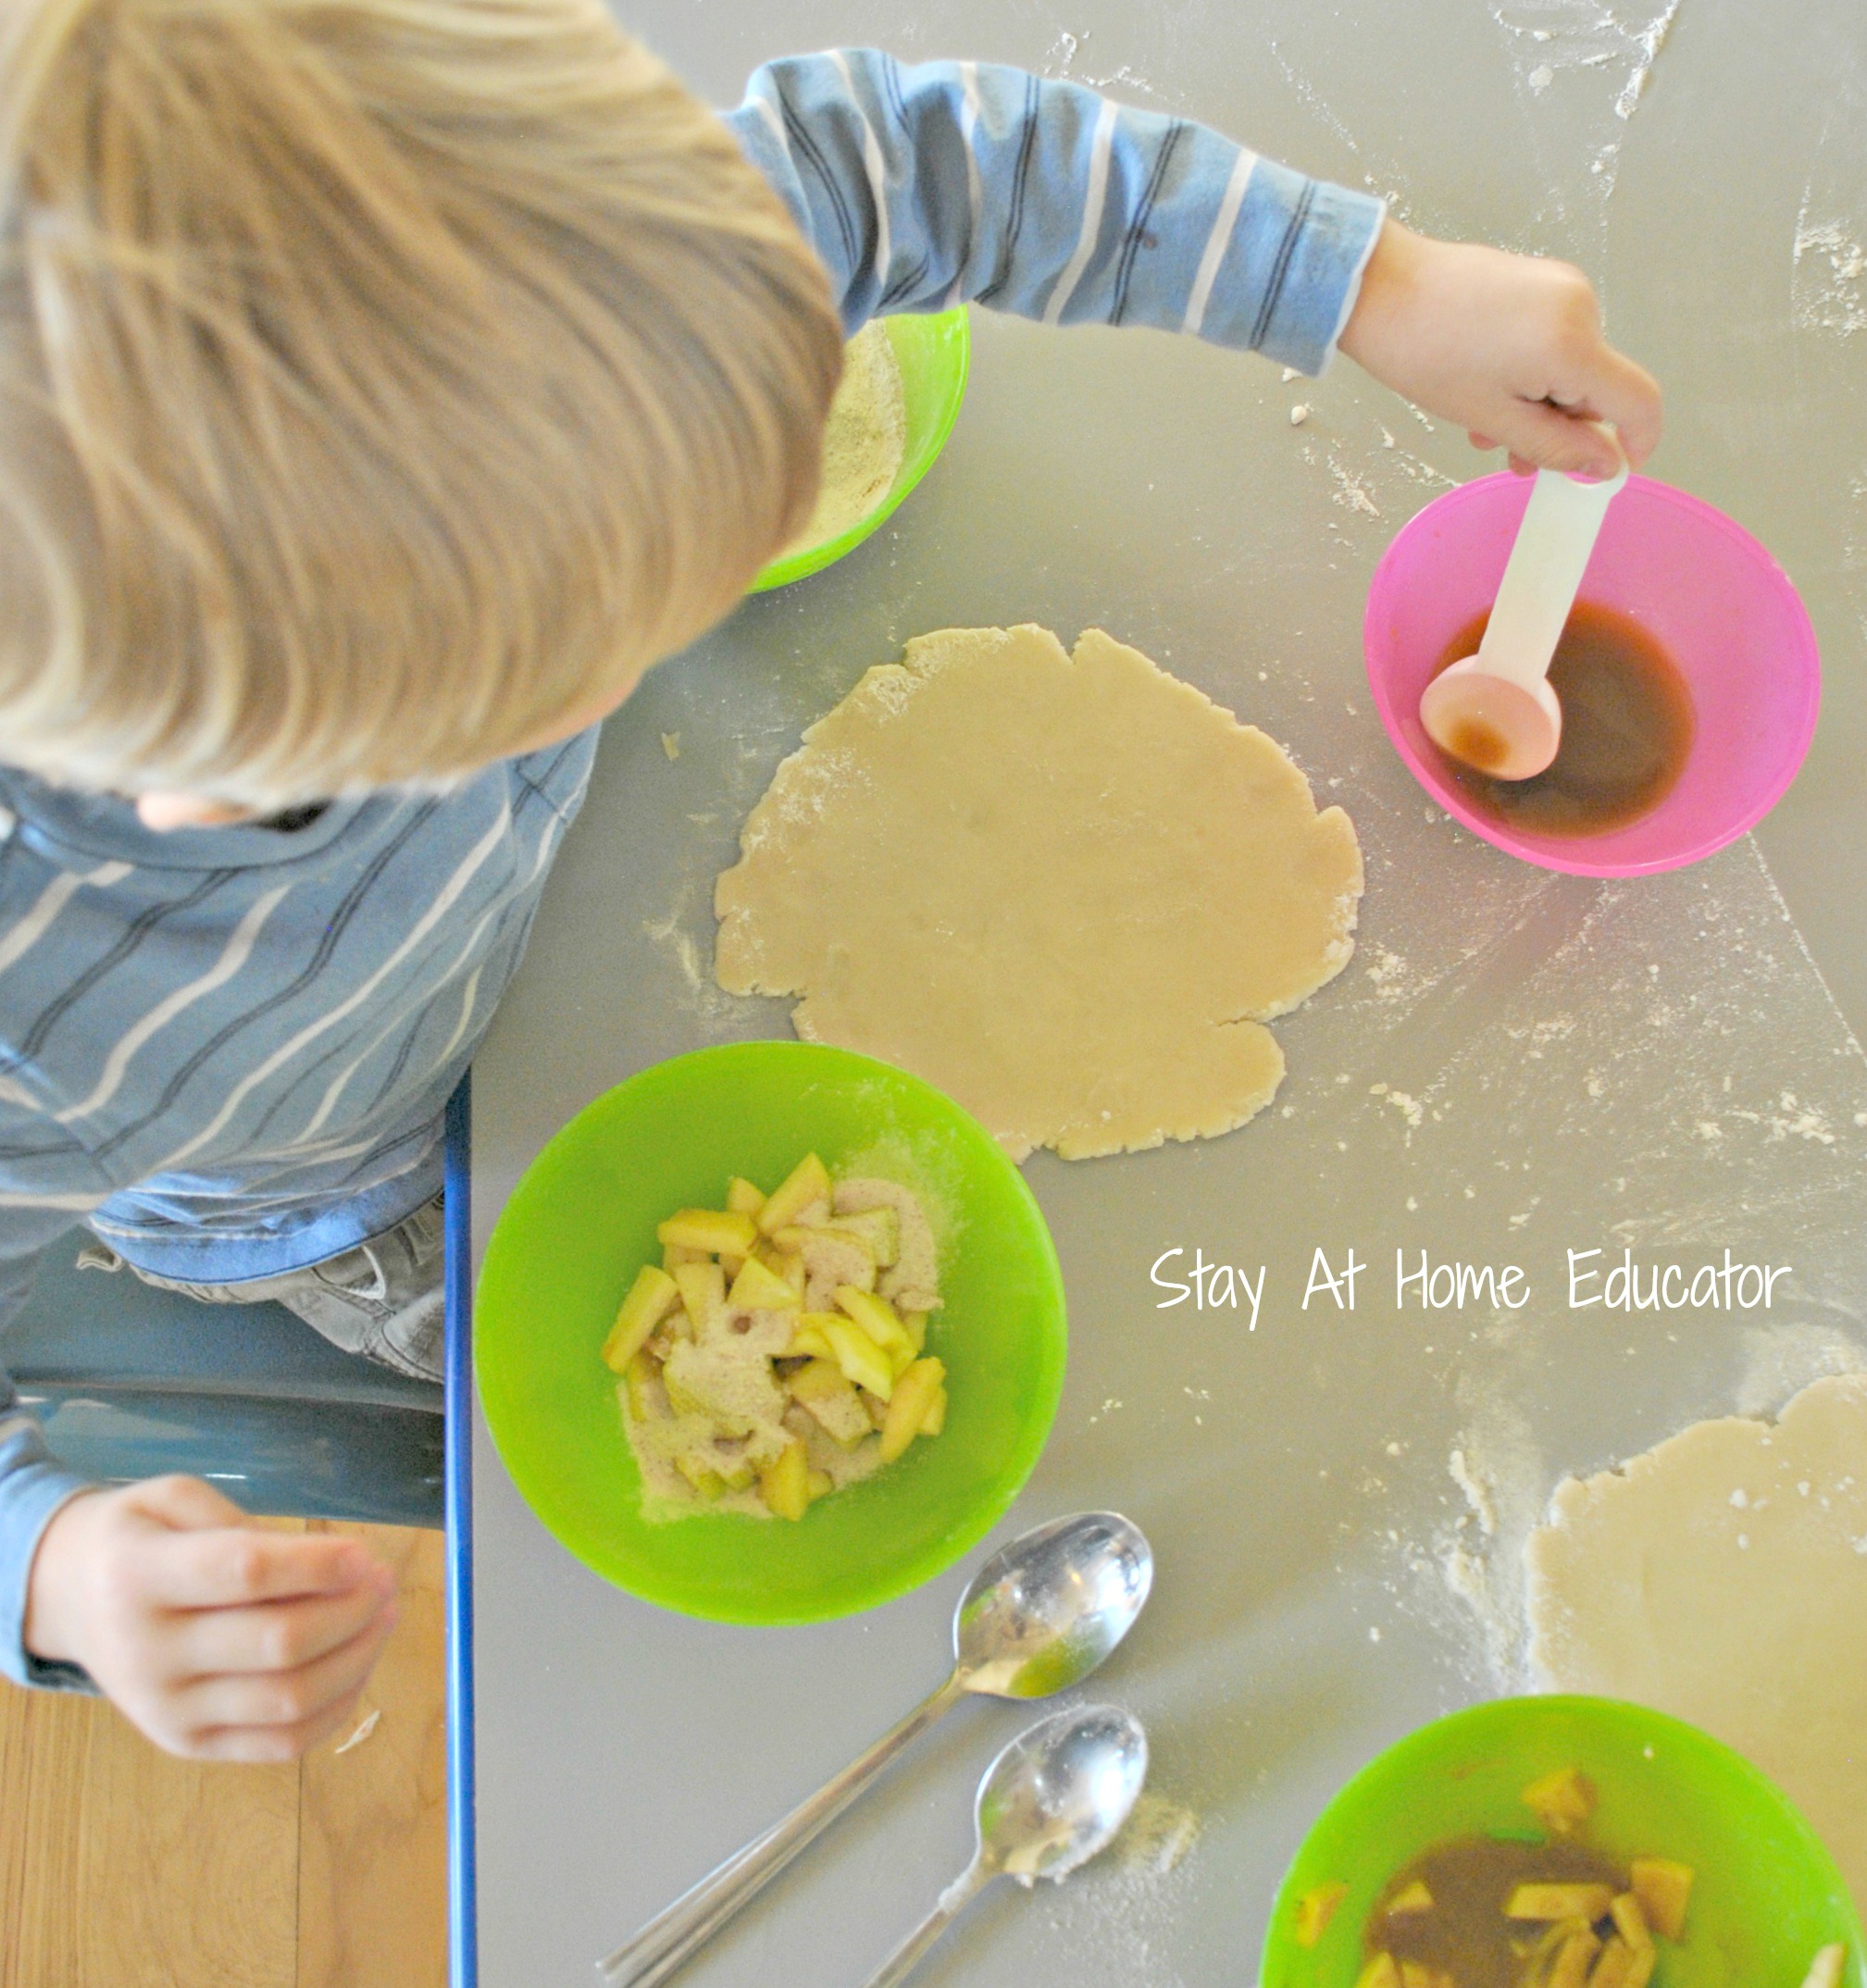 Preschooler making free form apple pie in harvest party - Stay At Home Educator